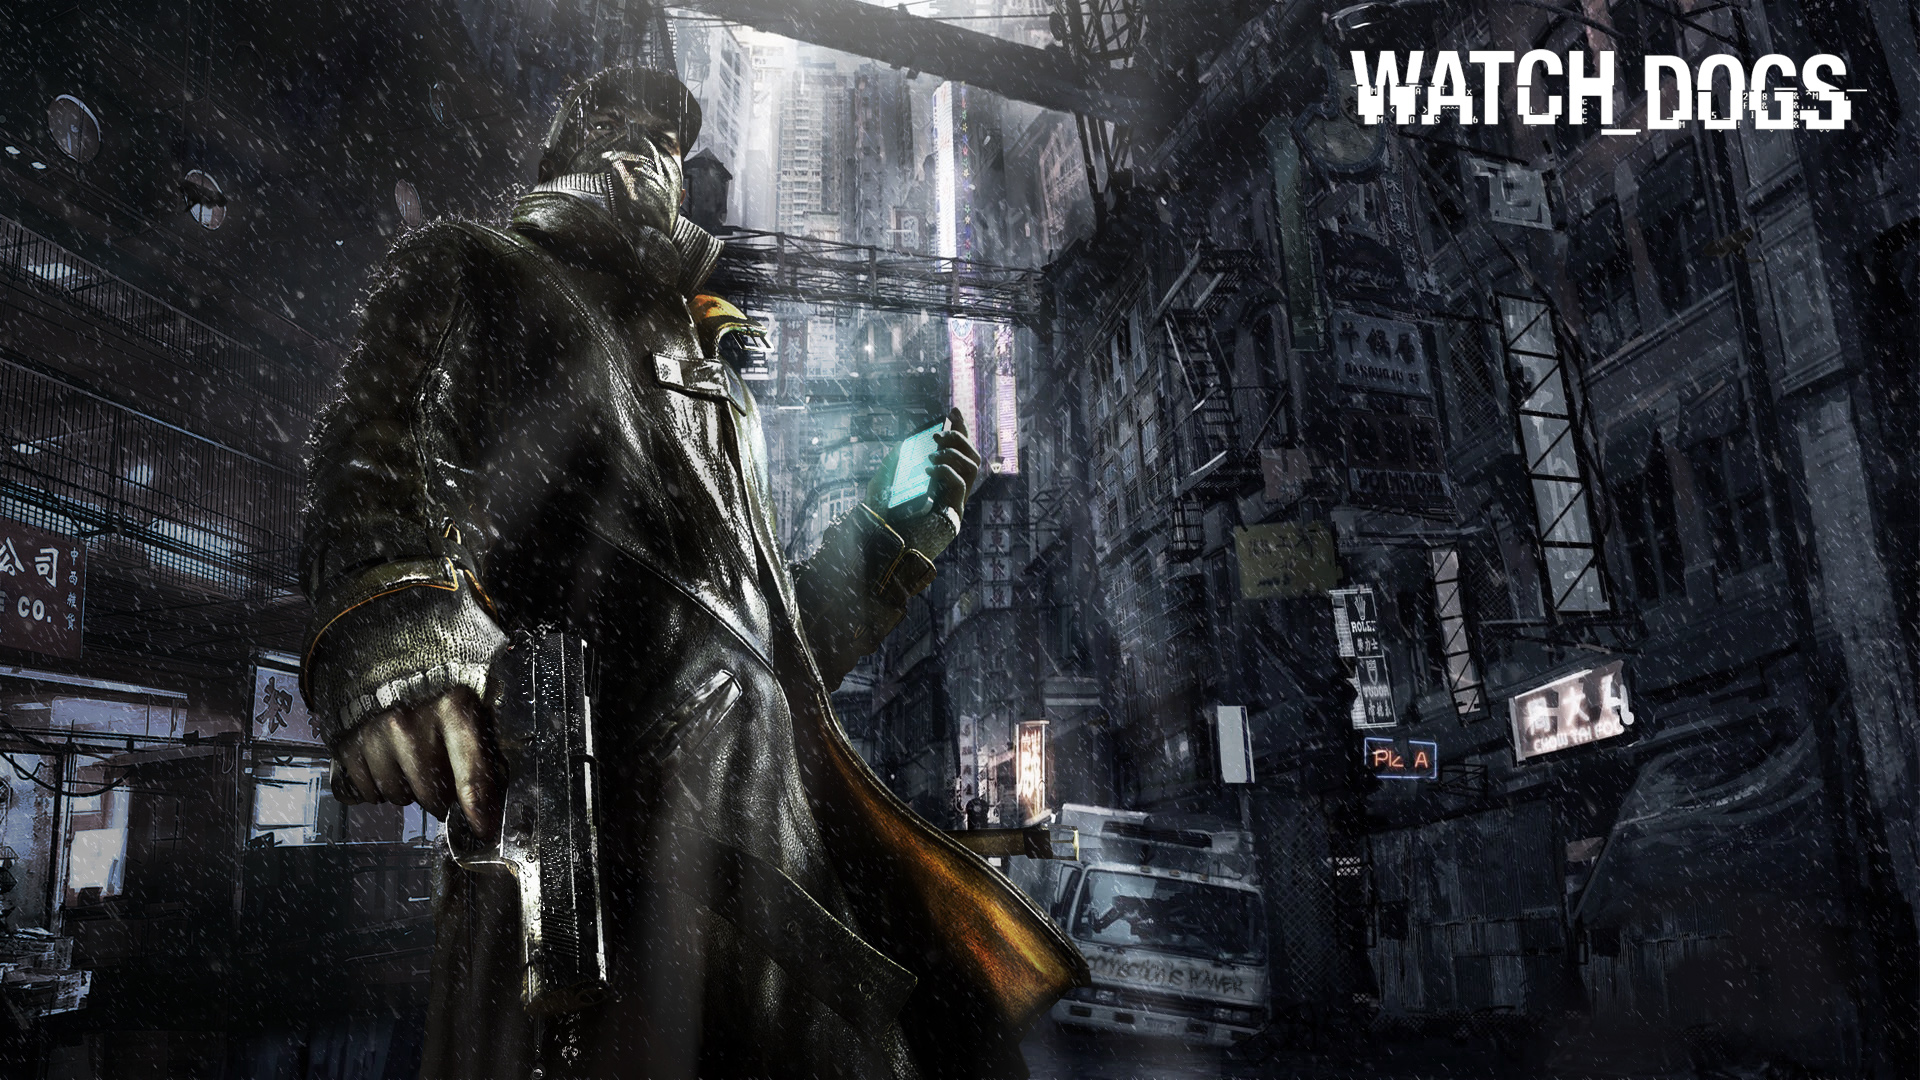 Watch Dogs Aiden Pearce # 1920x1080. All For Desktop